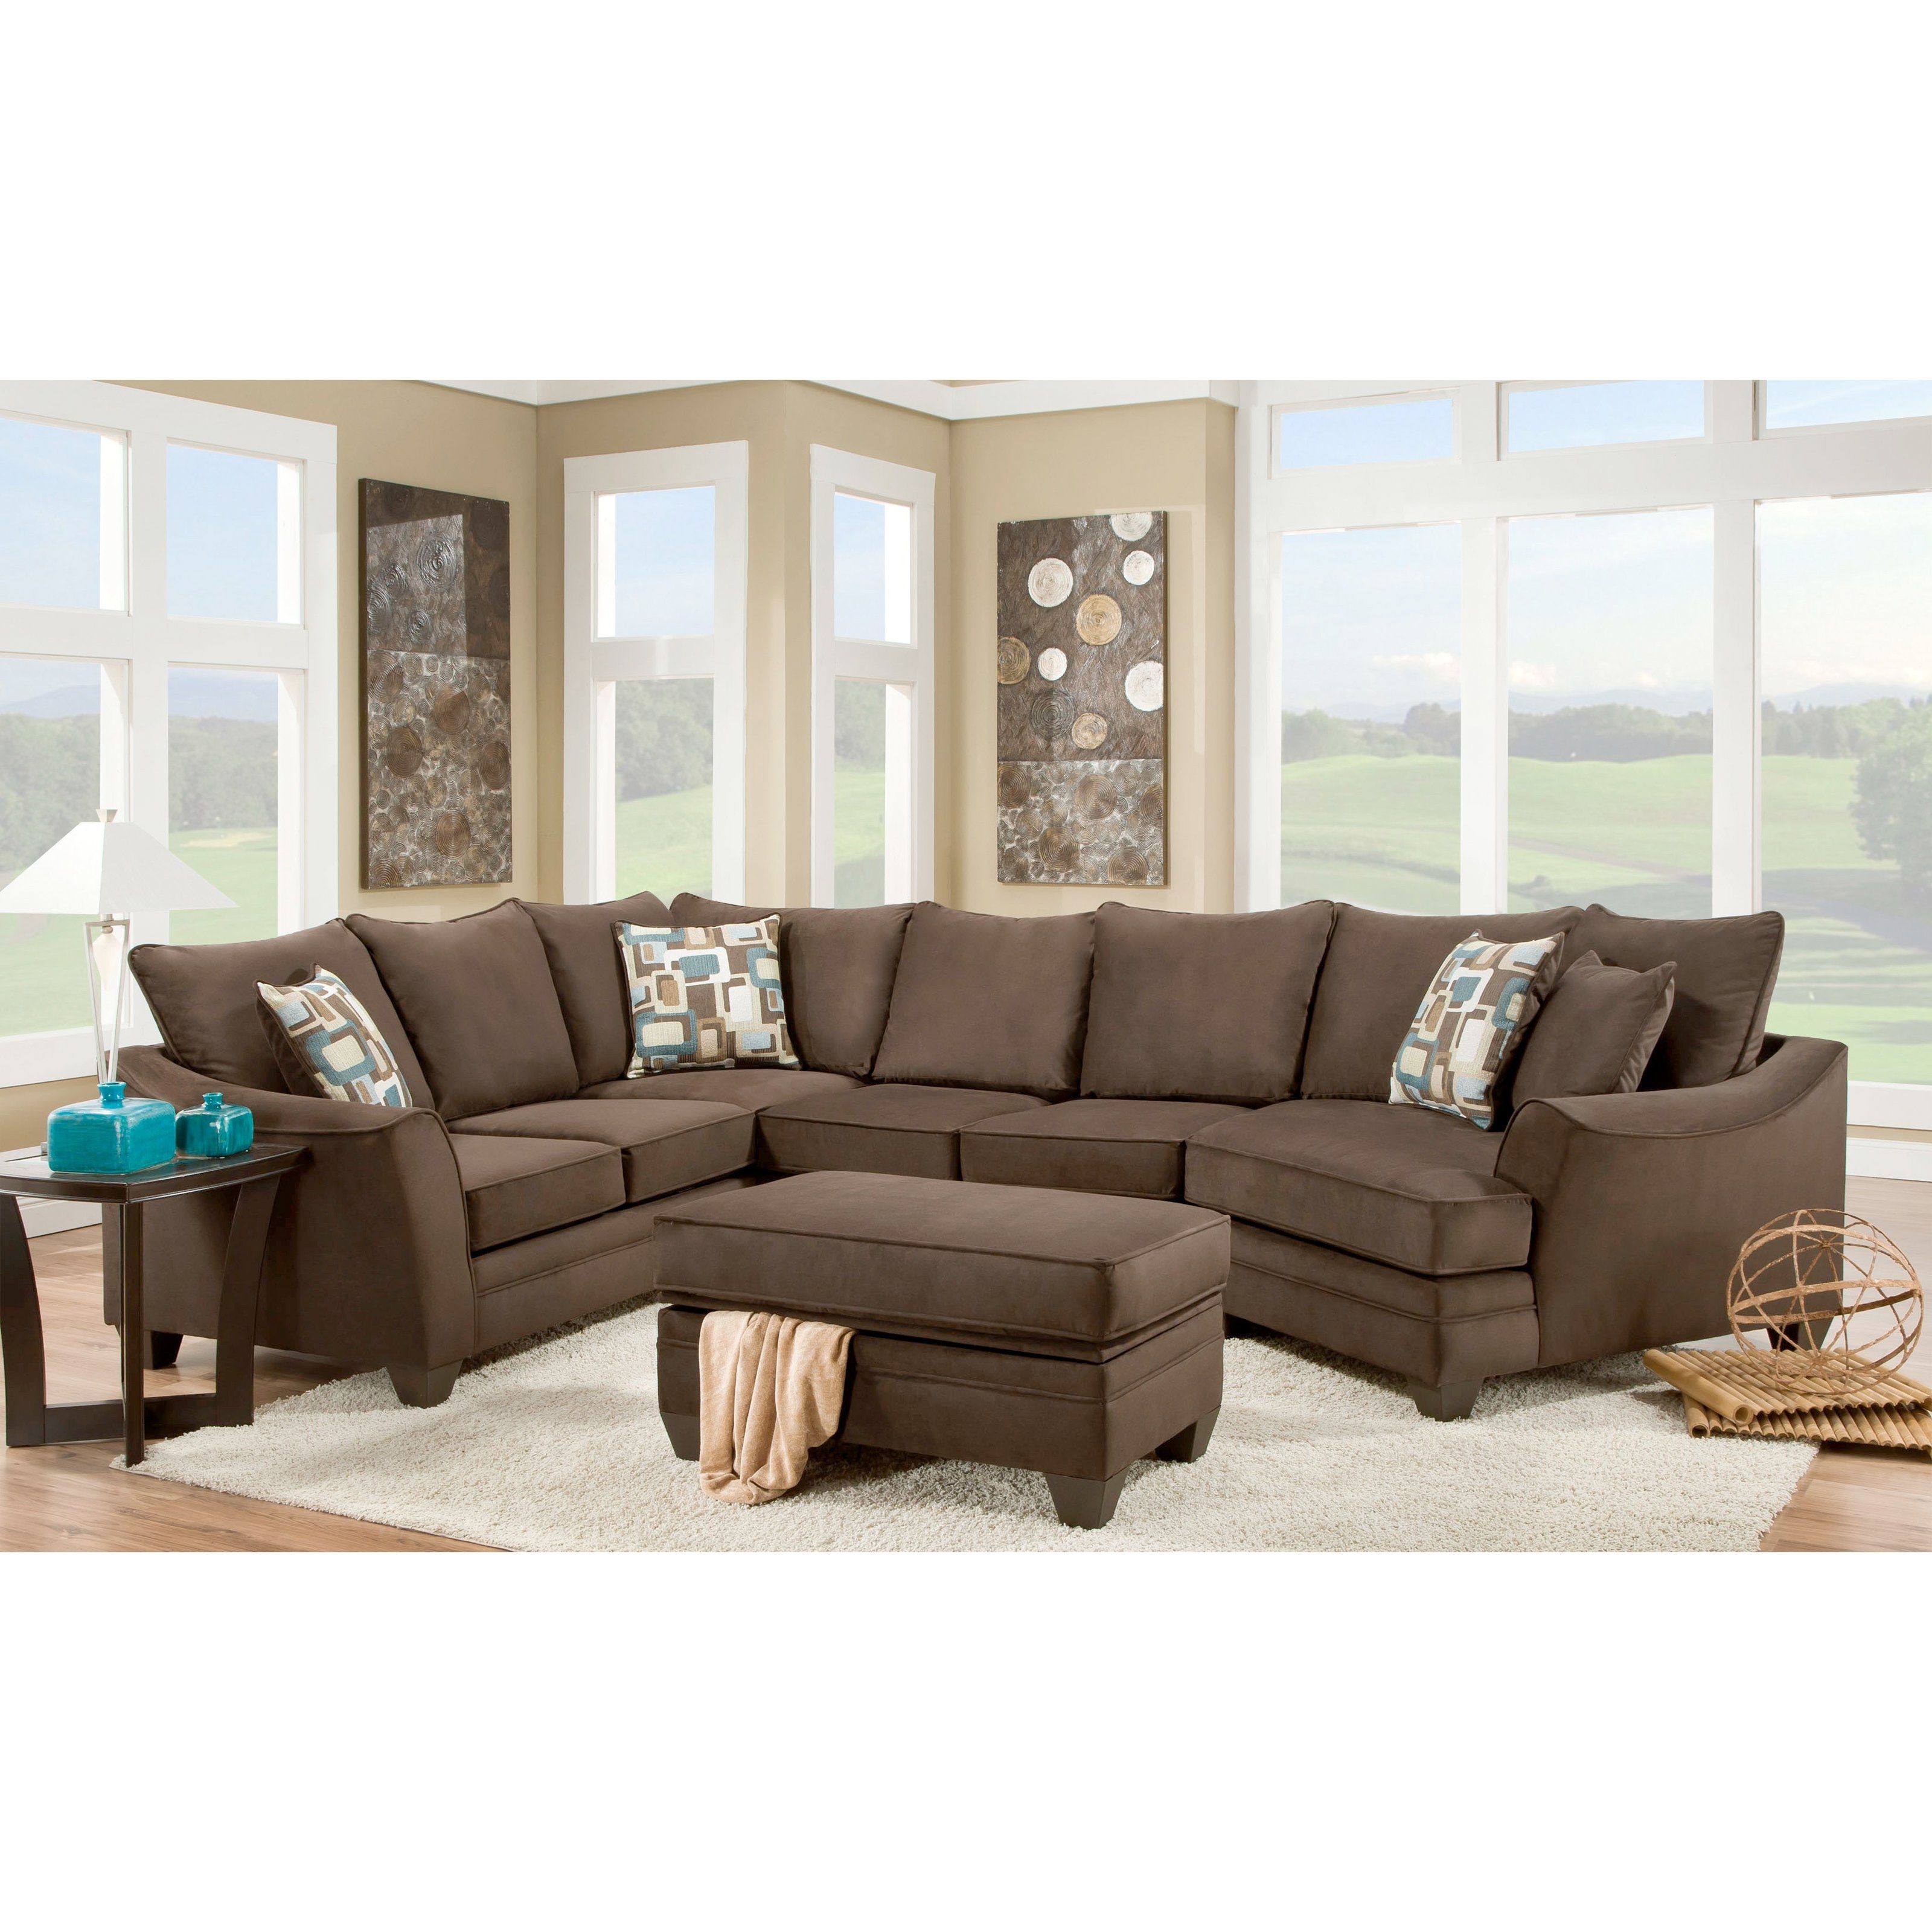 Featured Photo of 10 Collection of Greensboro Nc Sectional Sofas